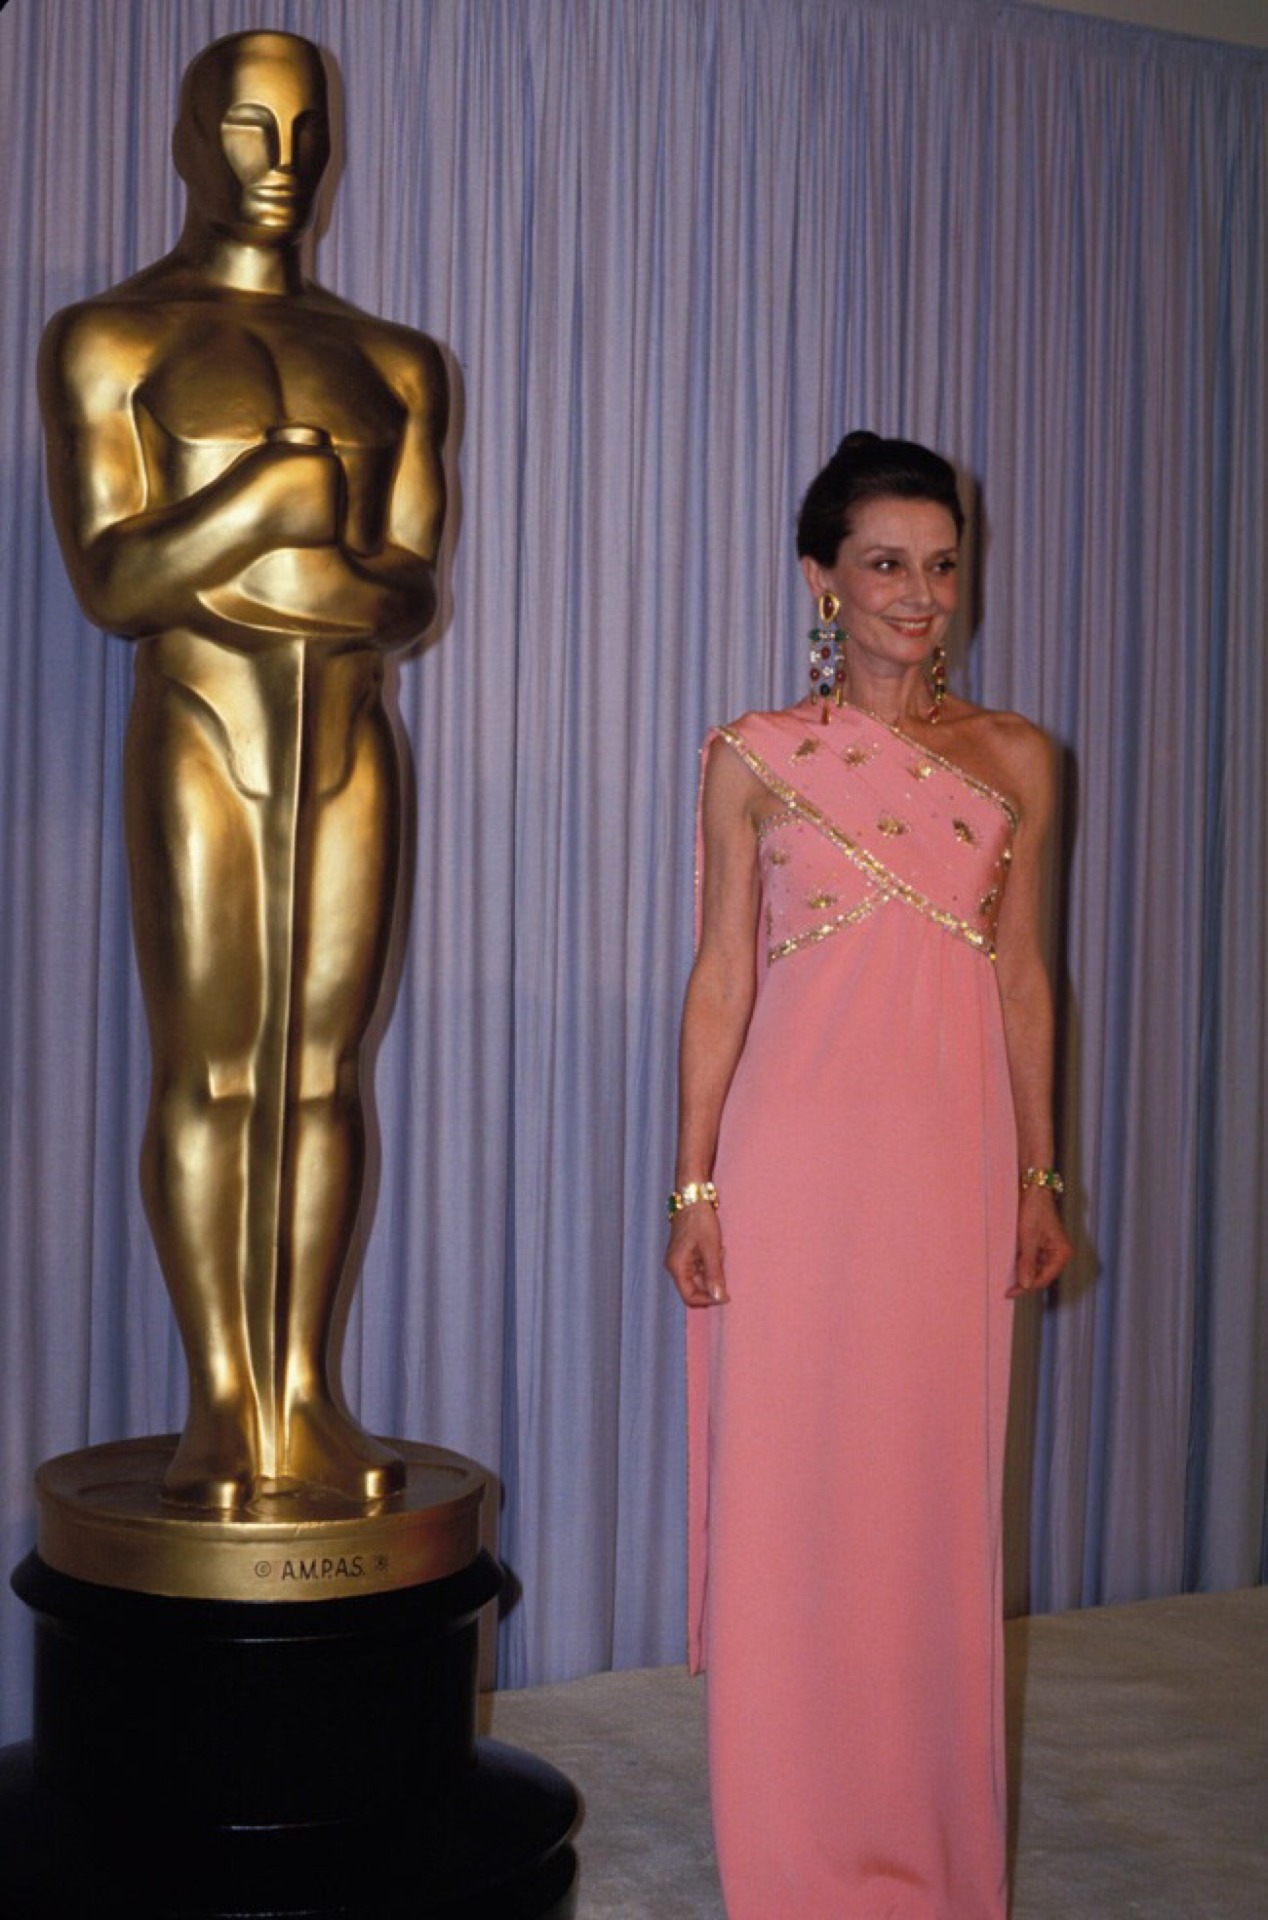 Audrey looking beautiful at the Academy Awards in Los Angeles, 1986.